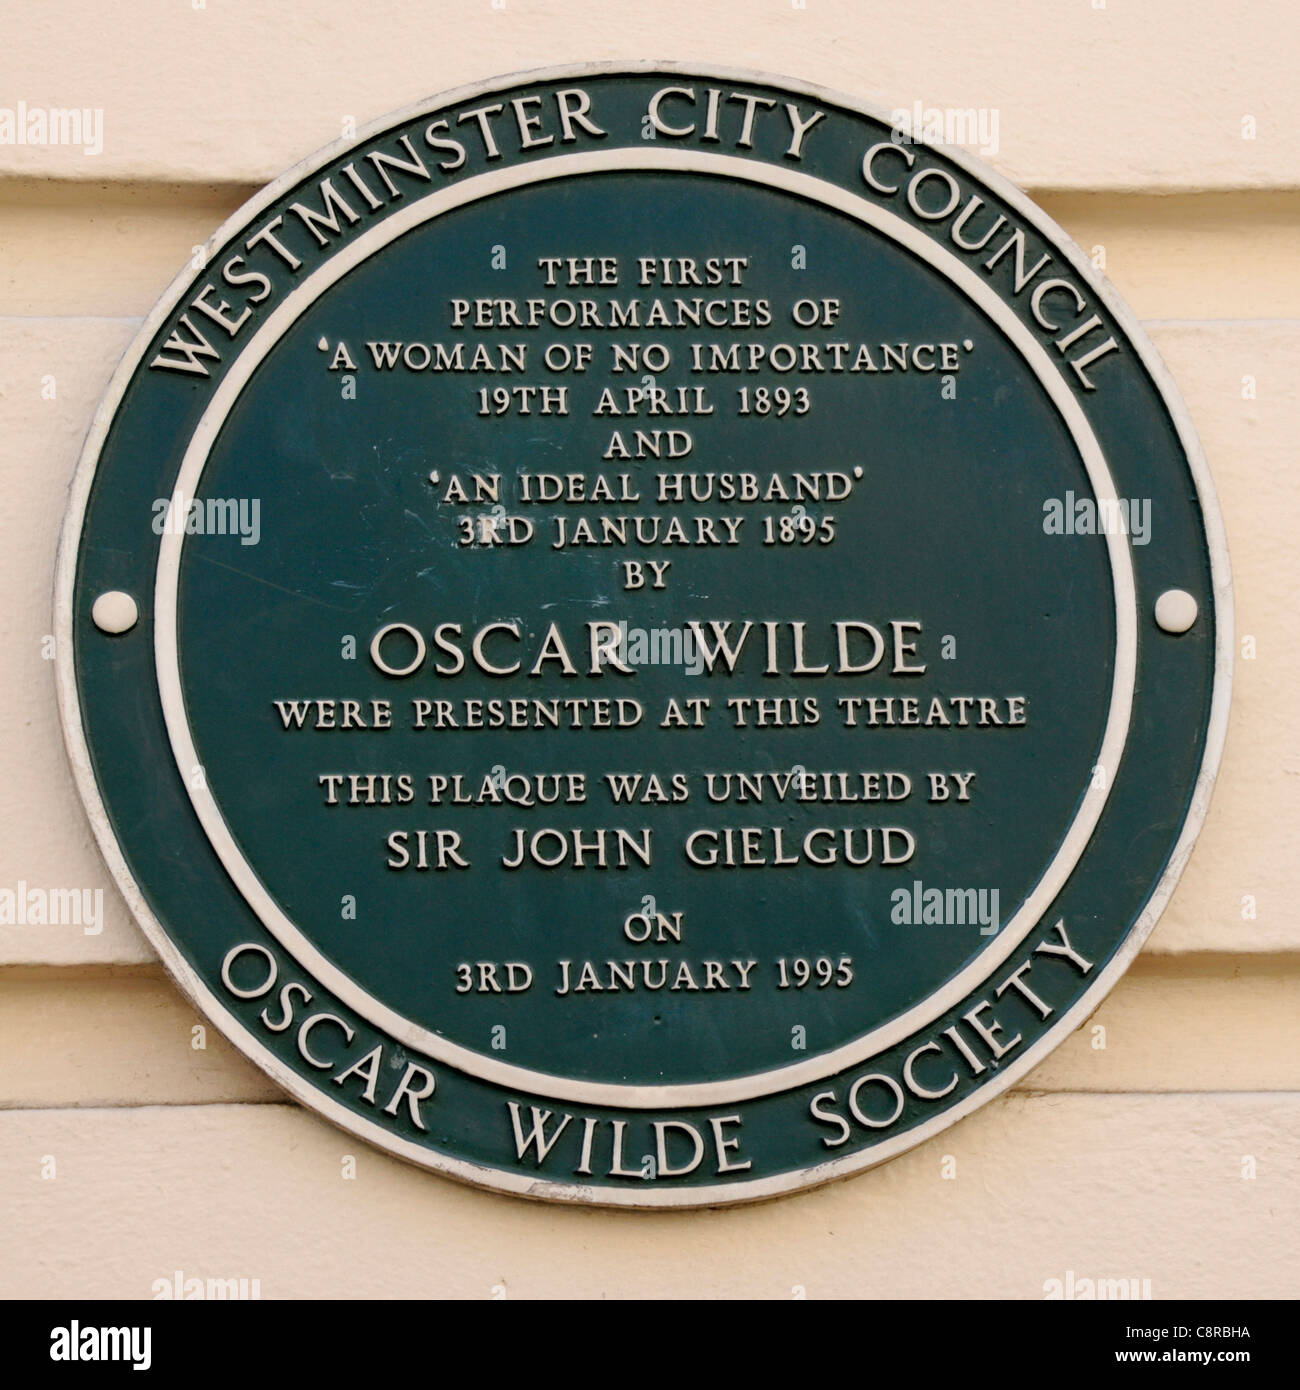 Oscar Wilde Society plaque at the Theatre Royal Haymarket London recording first performances of two Oscar Widle plays London West End England UK Stock Photo